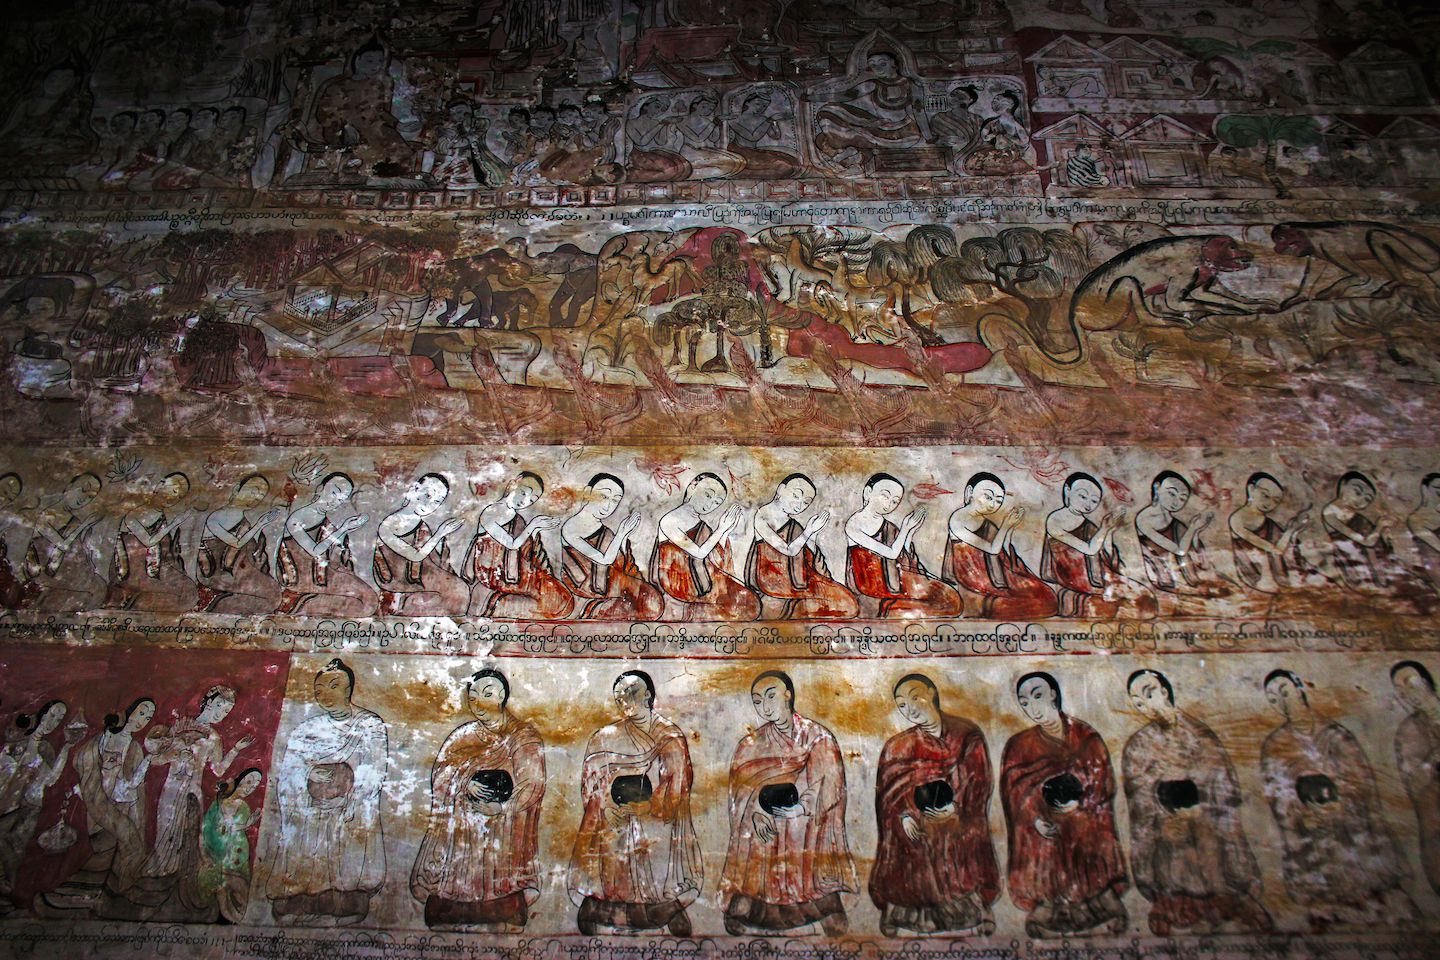 Paintings on the walls of the temples in Bagan, Myanmar